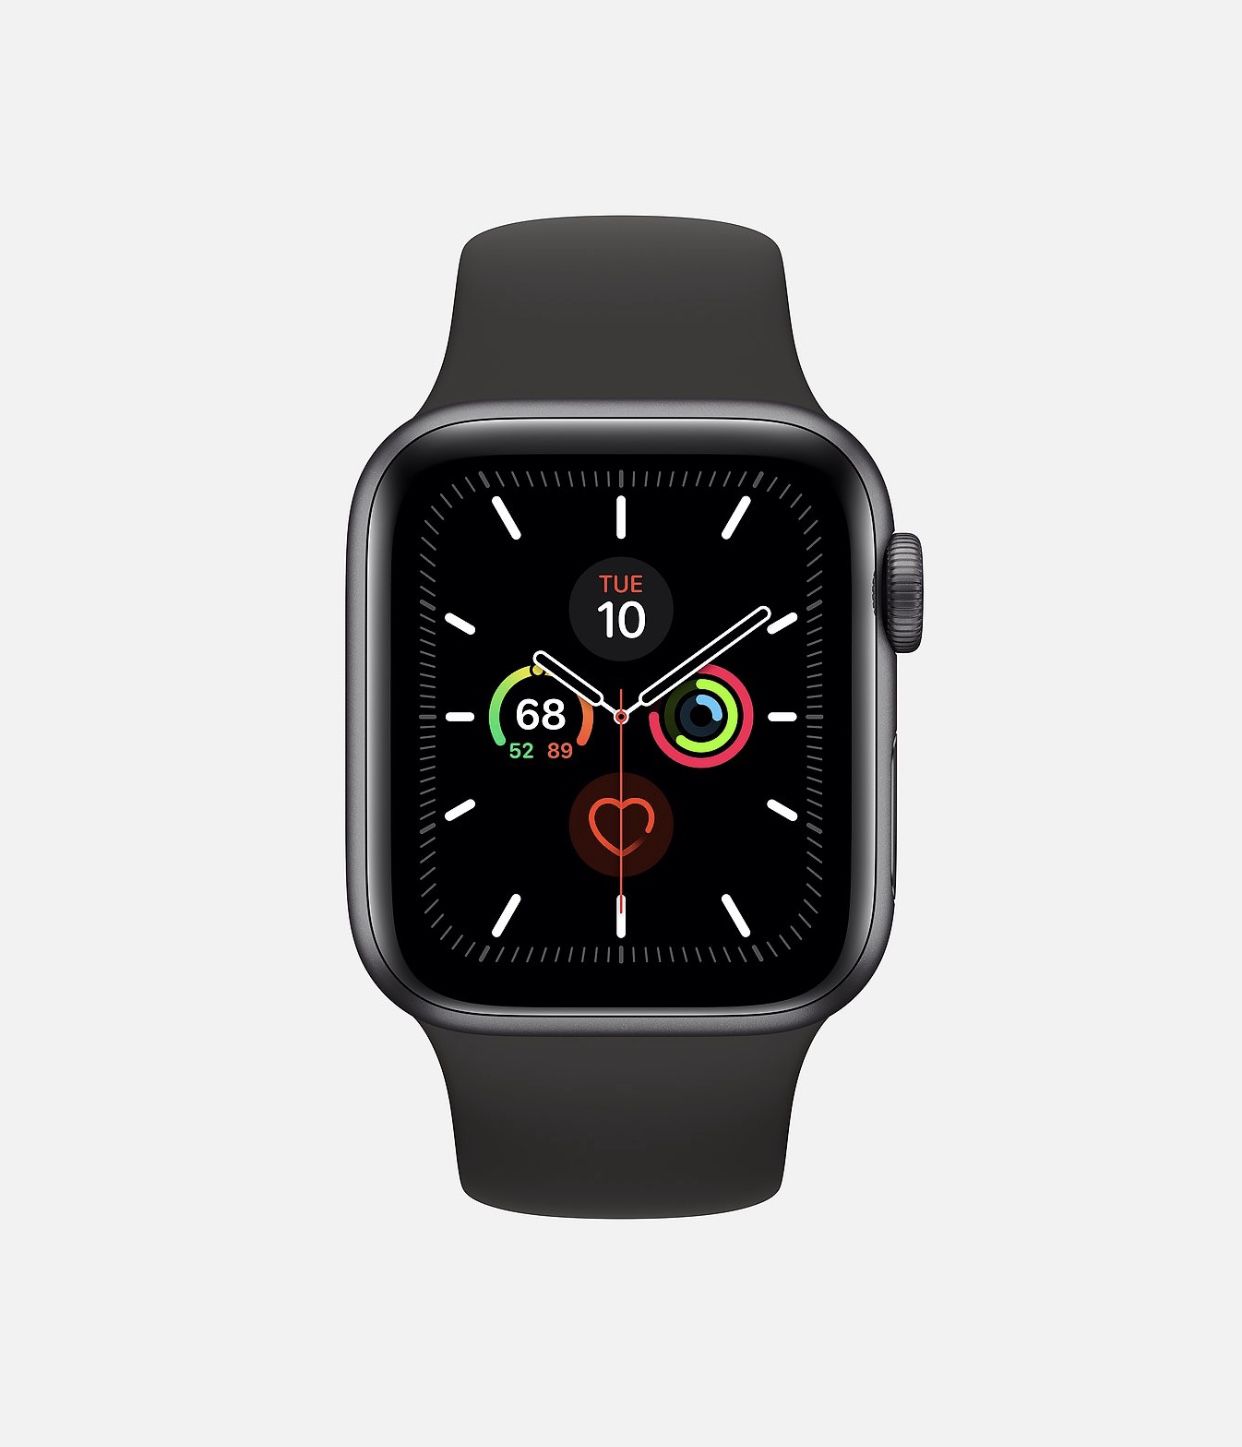 Apple Watch ⌚️ Space Gray Aluminum Case with Sports Band, 44mm, GPS + Cellular, Brand New Condition